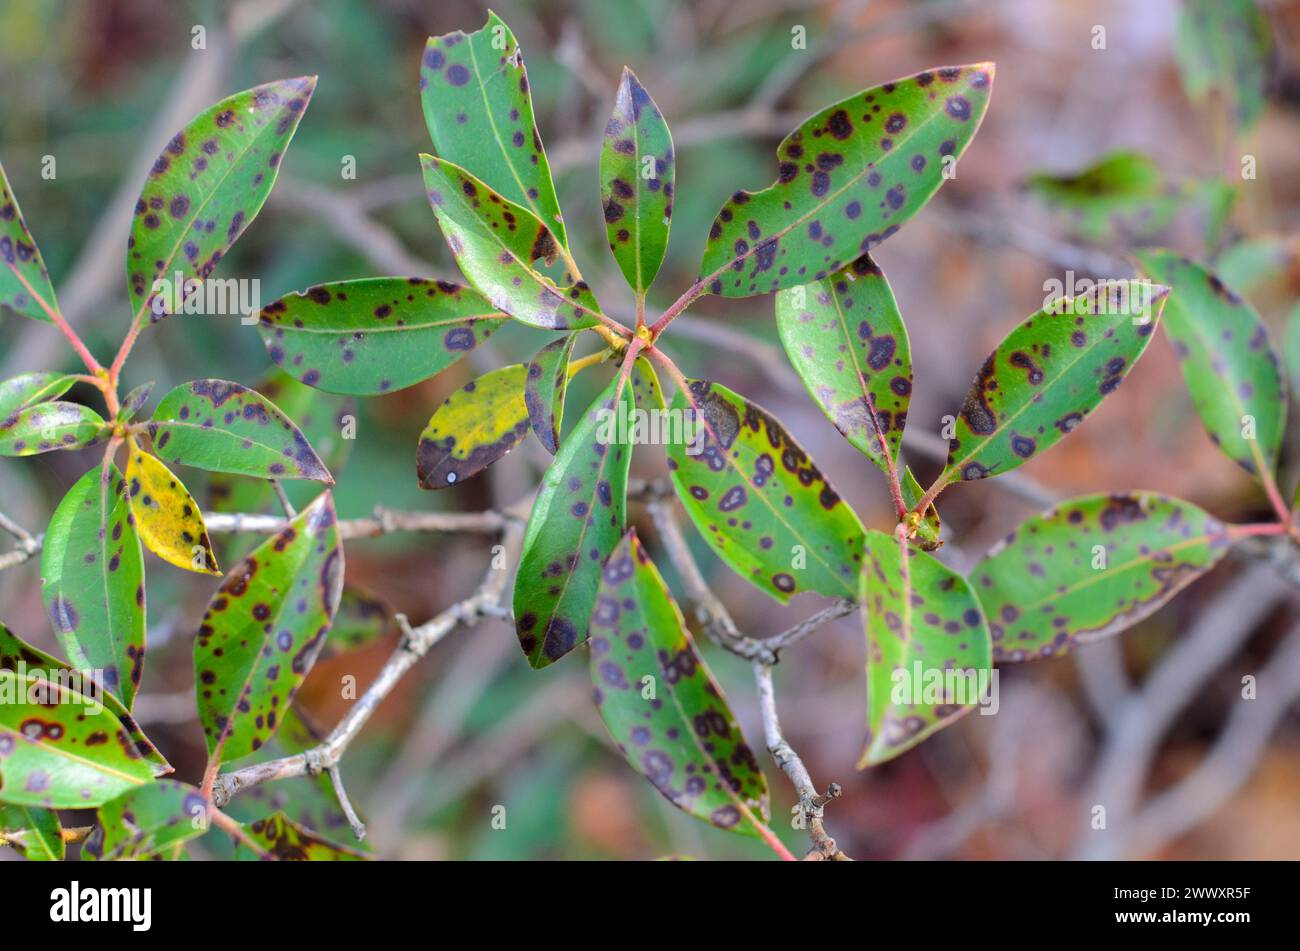 Damaged leaf with Leaf spot disease. Mountain laurel, leaf spots, caused by Phyllosticta Kalmicola. Stock Photo